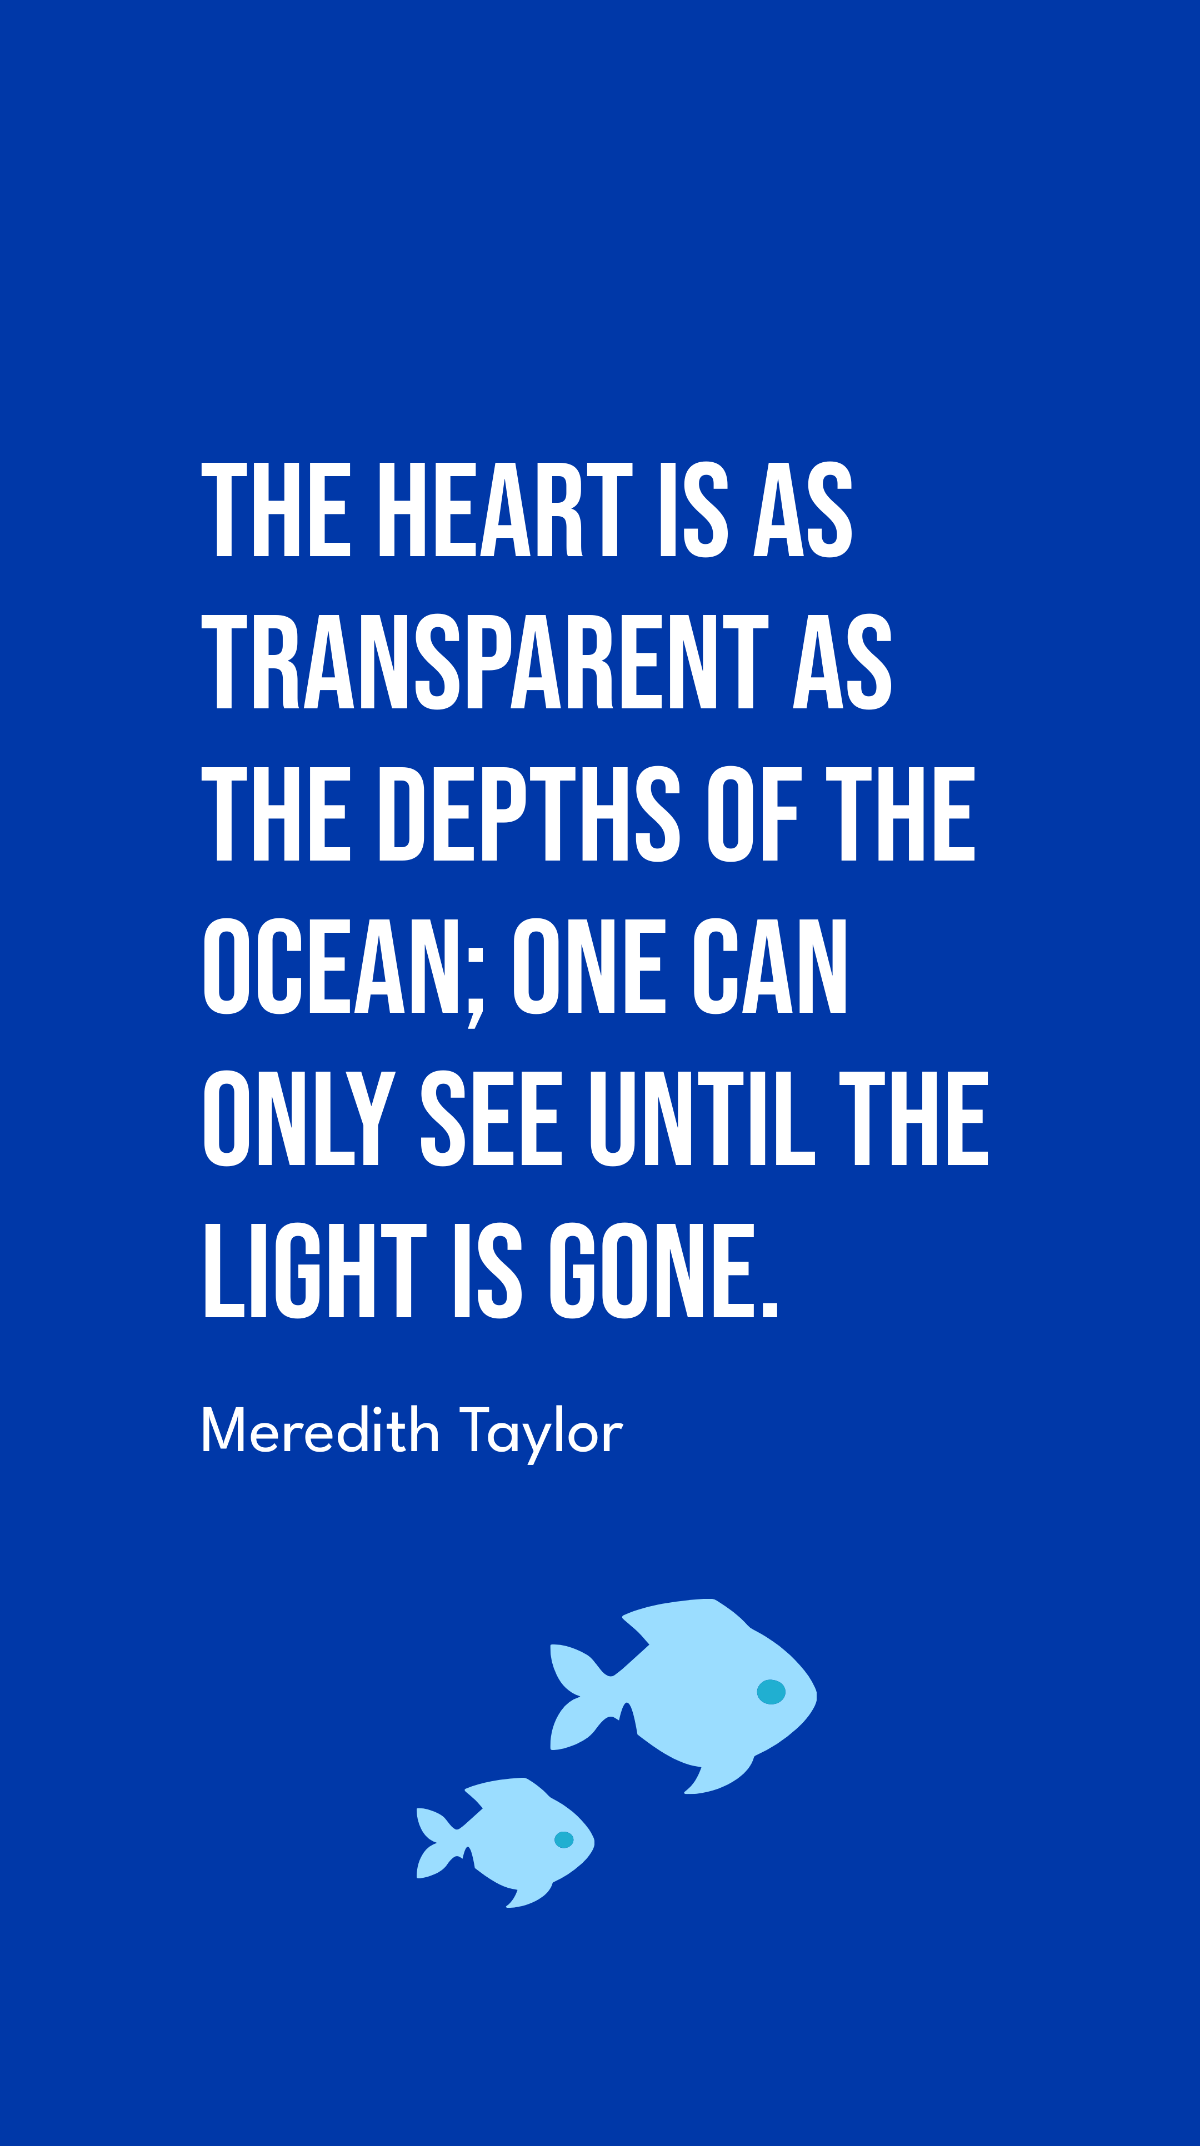 Meredith Taylor - The heart is as transparent as the depths of the ocean; one can only see until the light is gone. Template